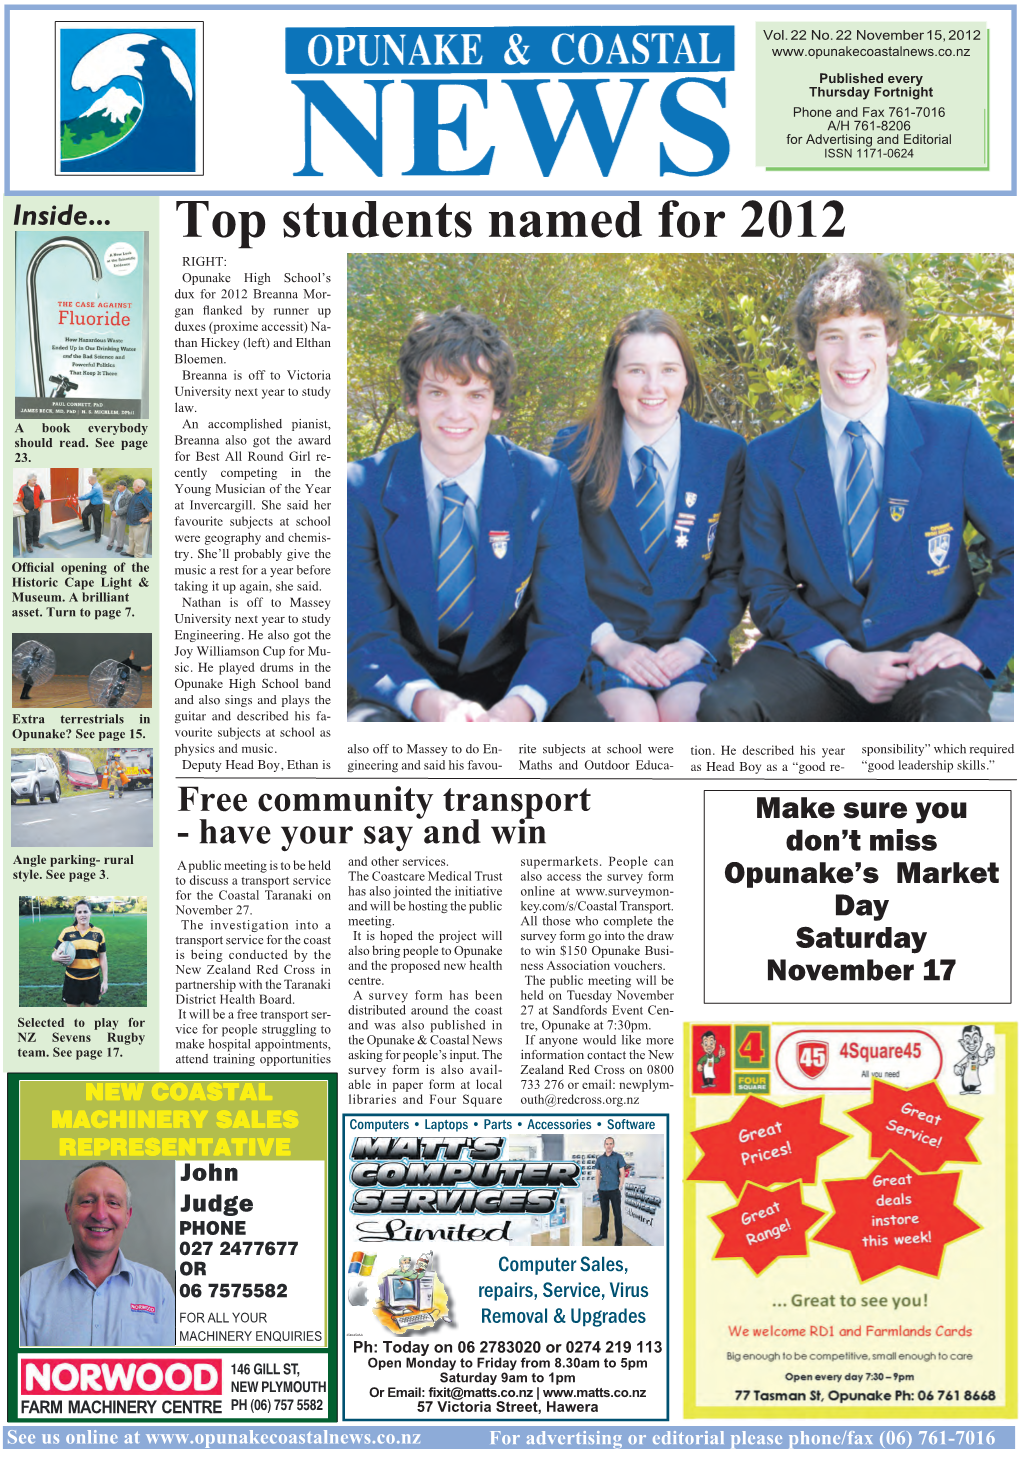 Top Students Named for 2012